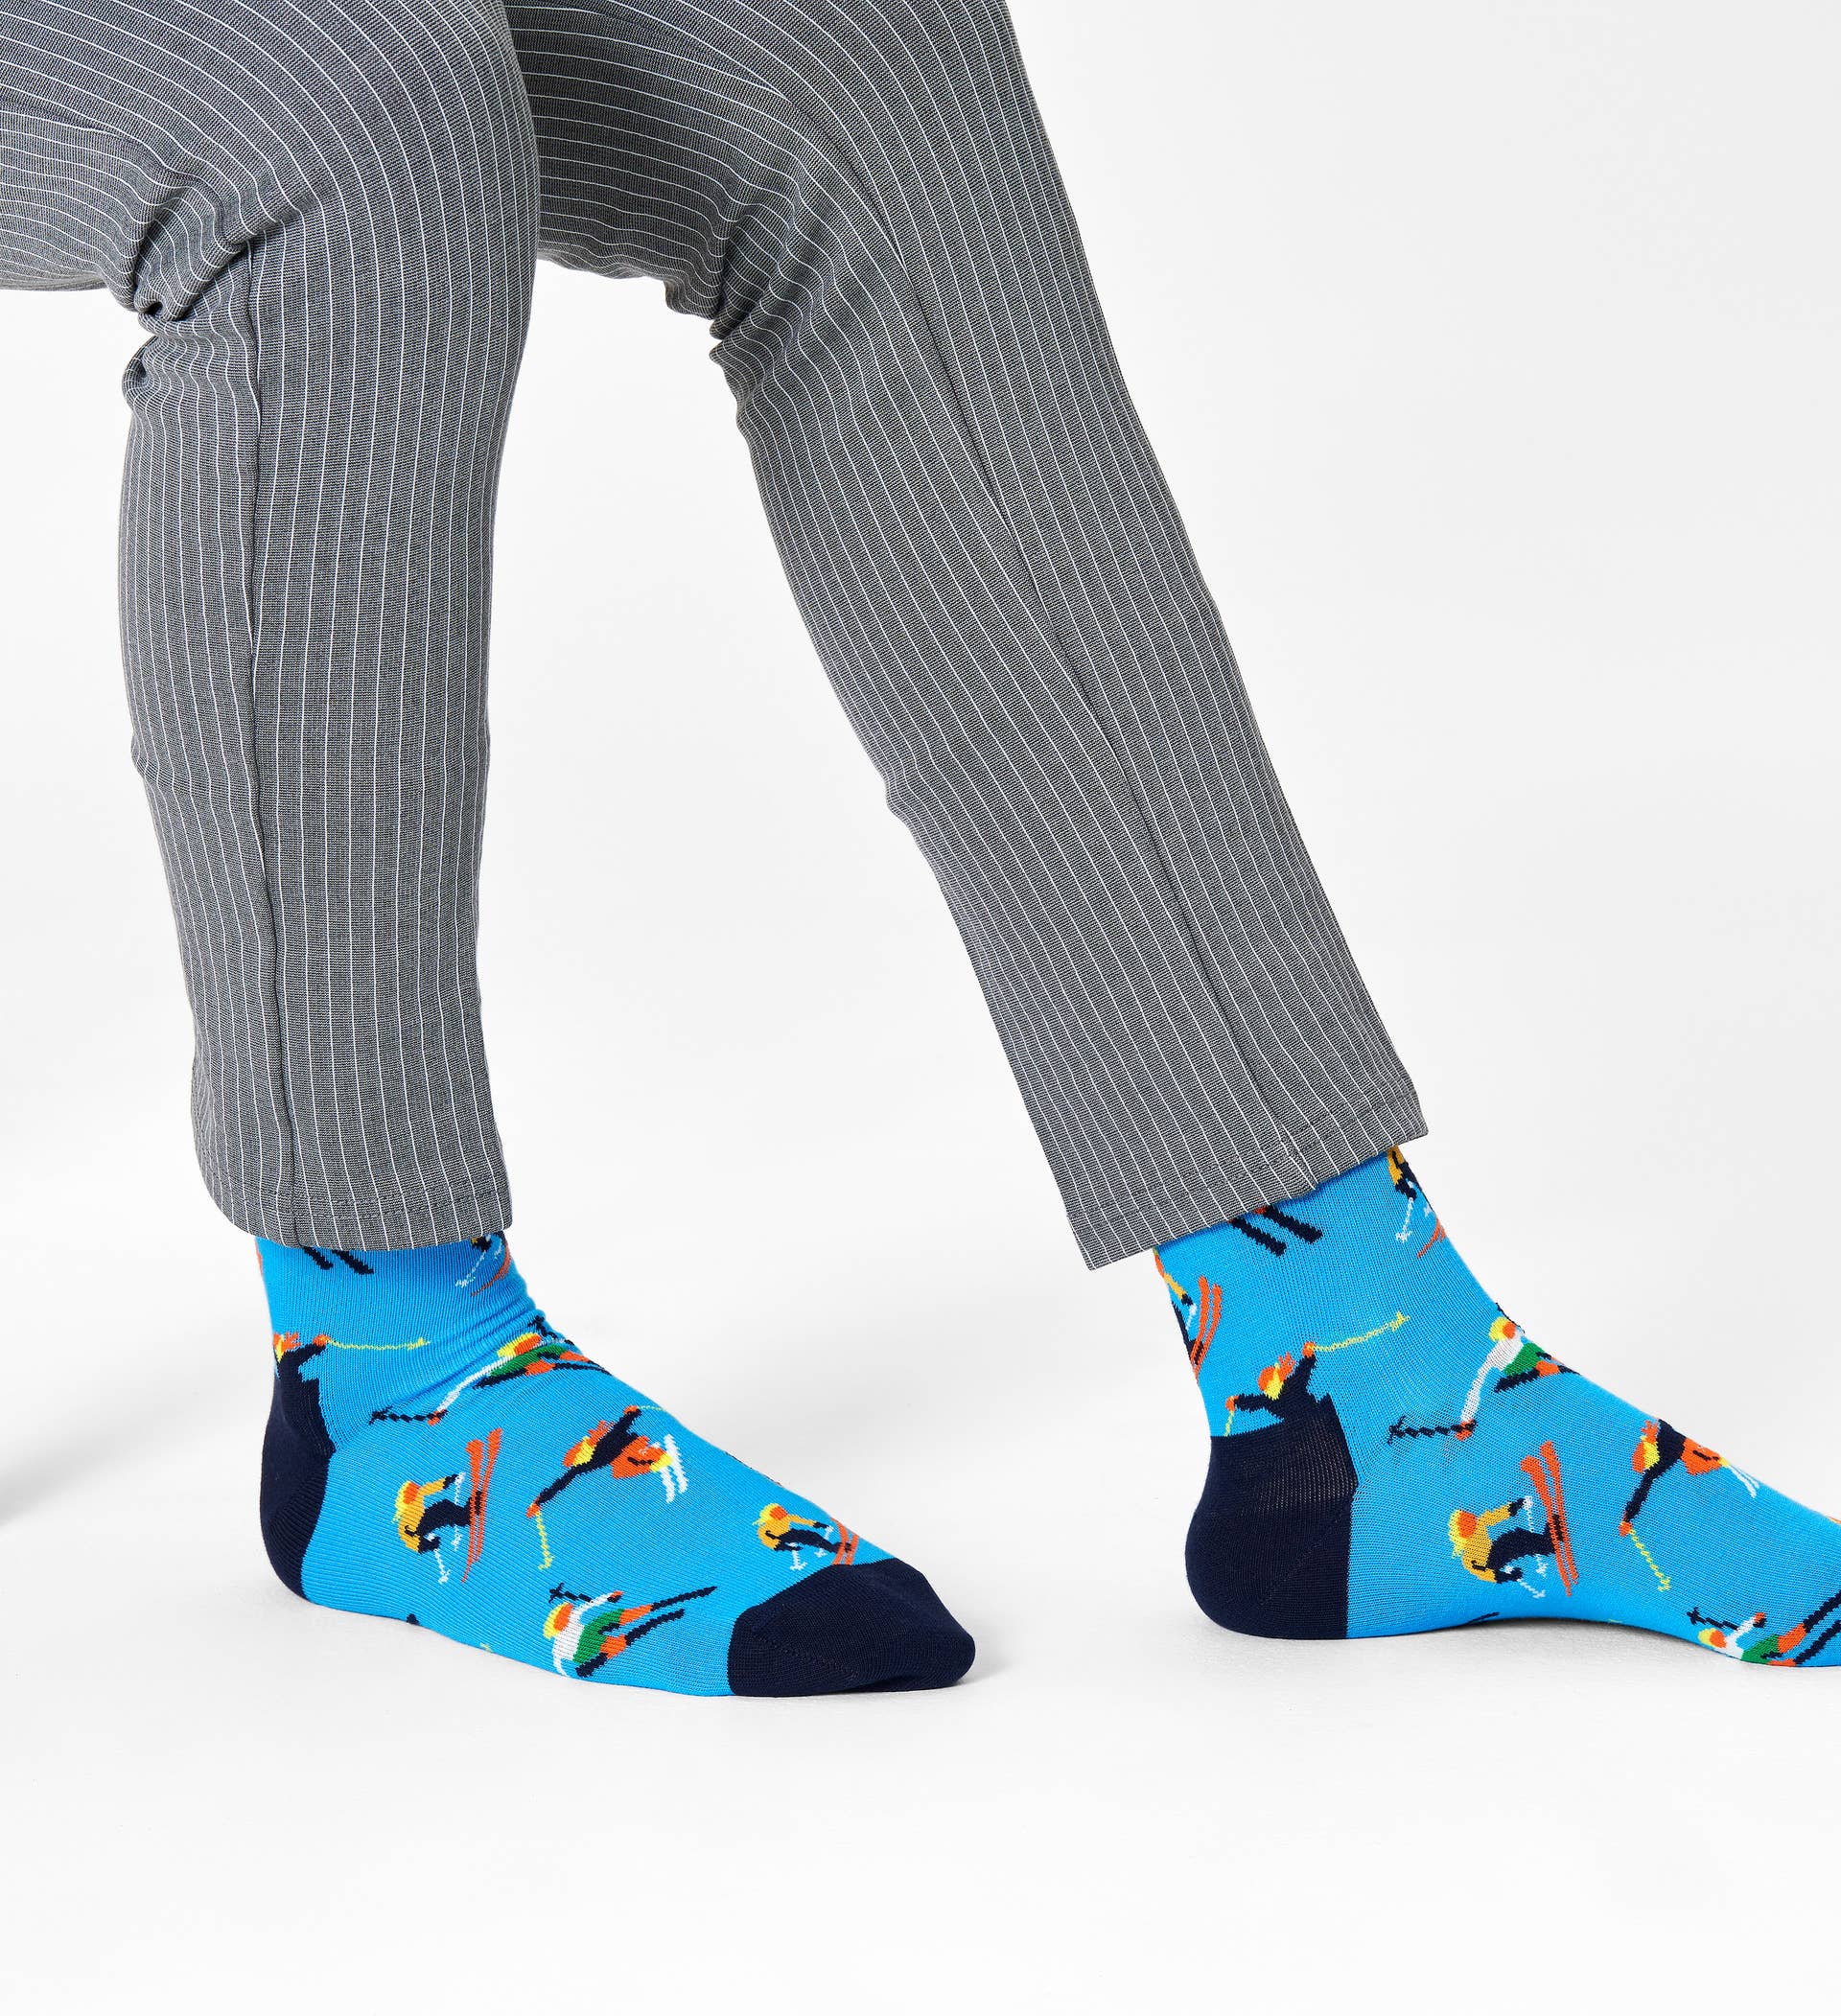 Happy Socks SKI01-6300 Skiing Sock - Sky blue cotton ankle socks with multicoloured jumping skiers, dark navy cuff and toe. Perfect Christmas gift.